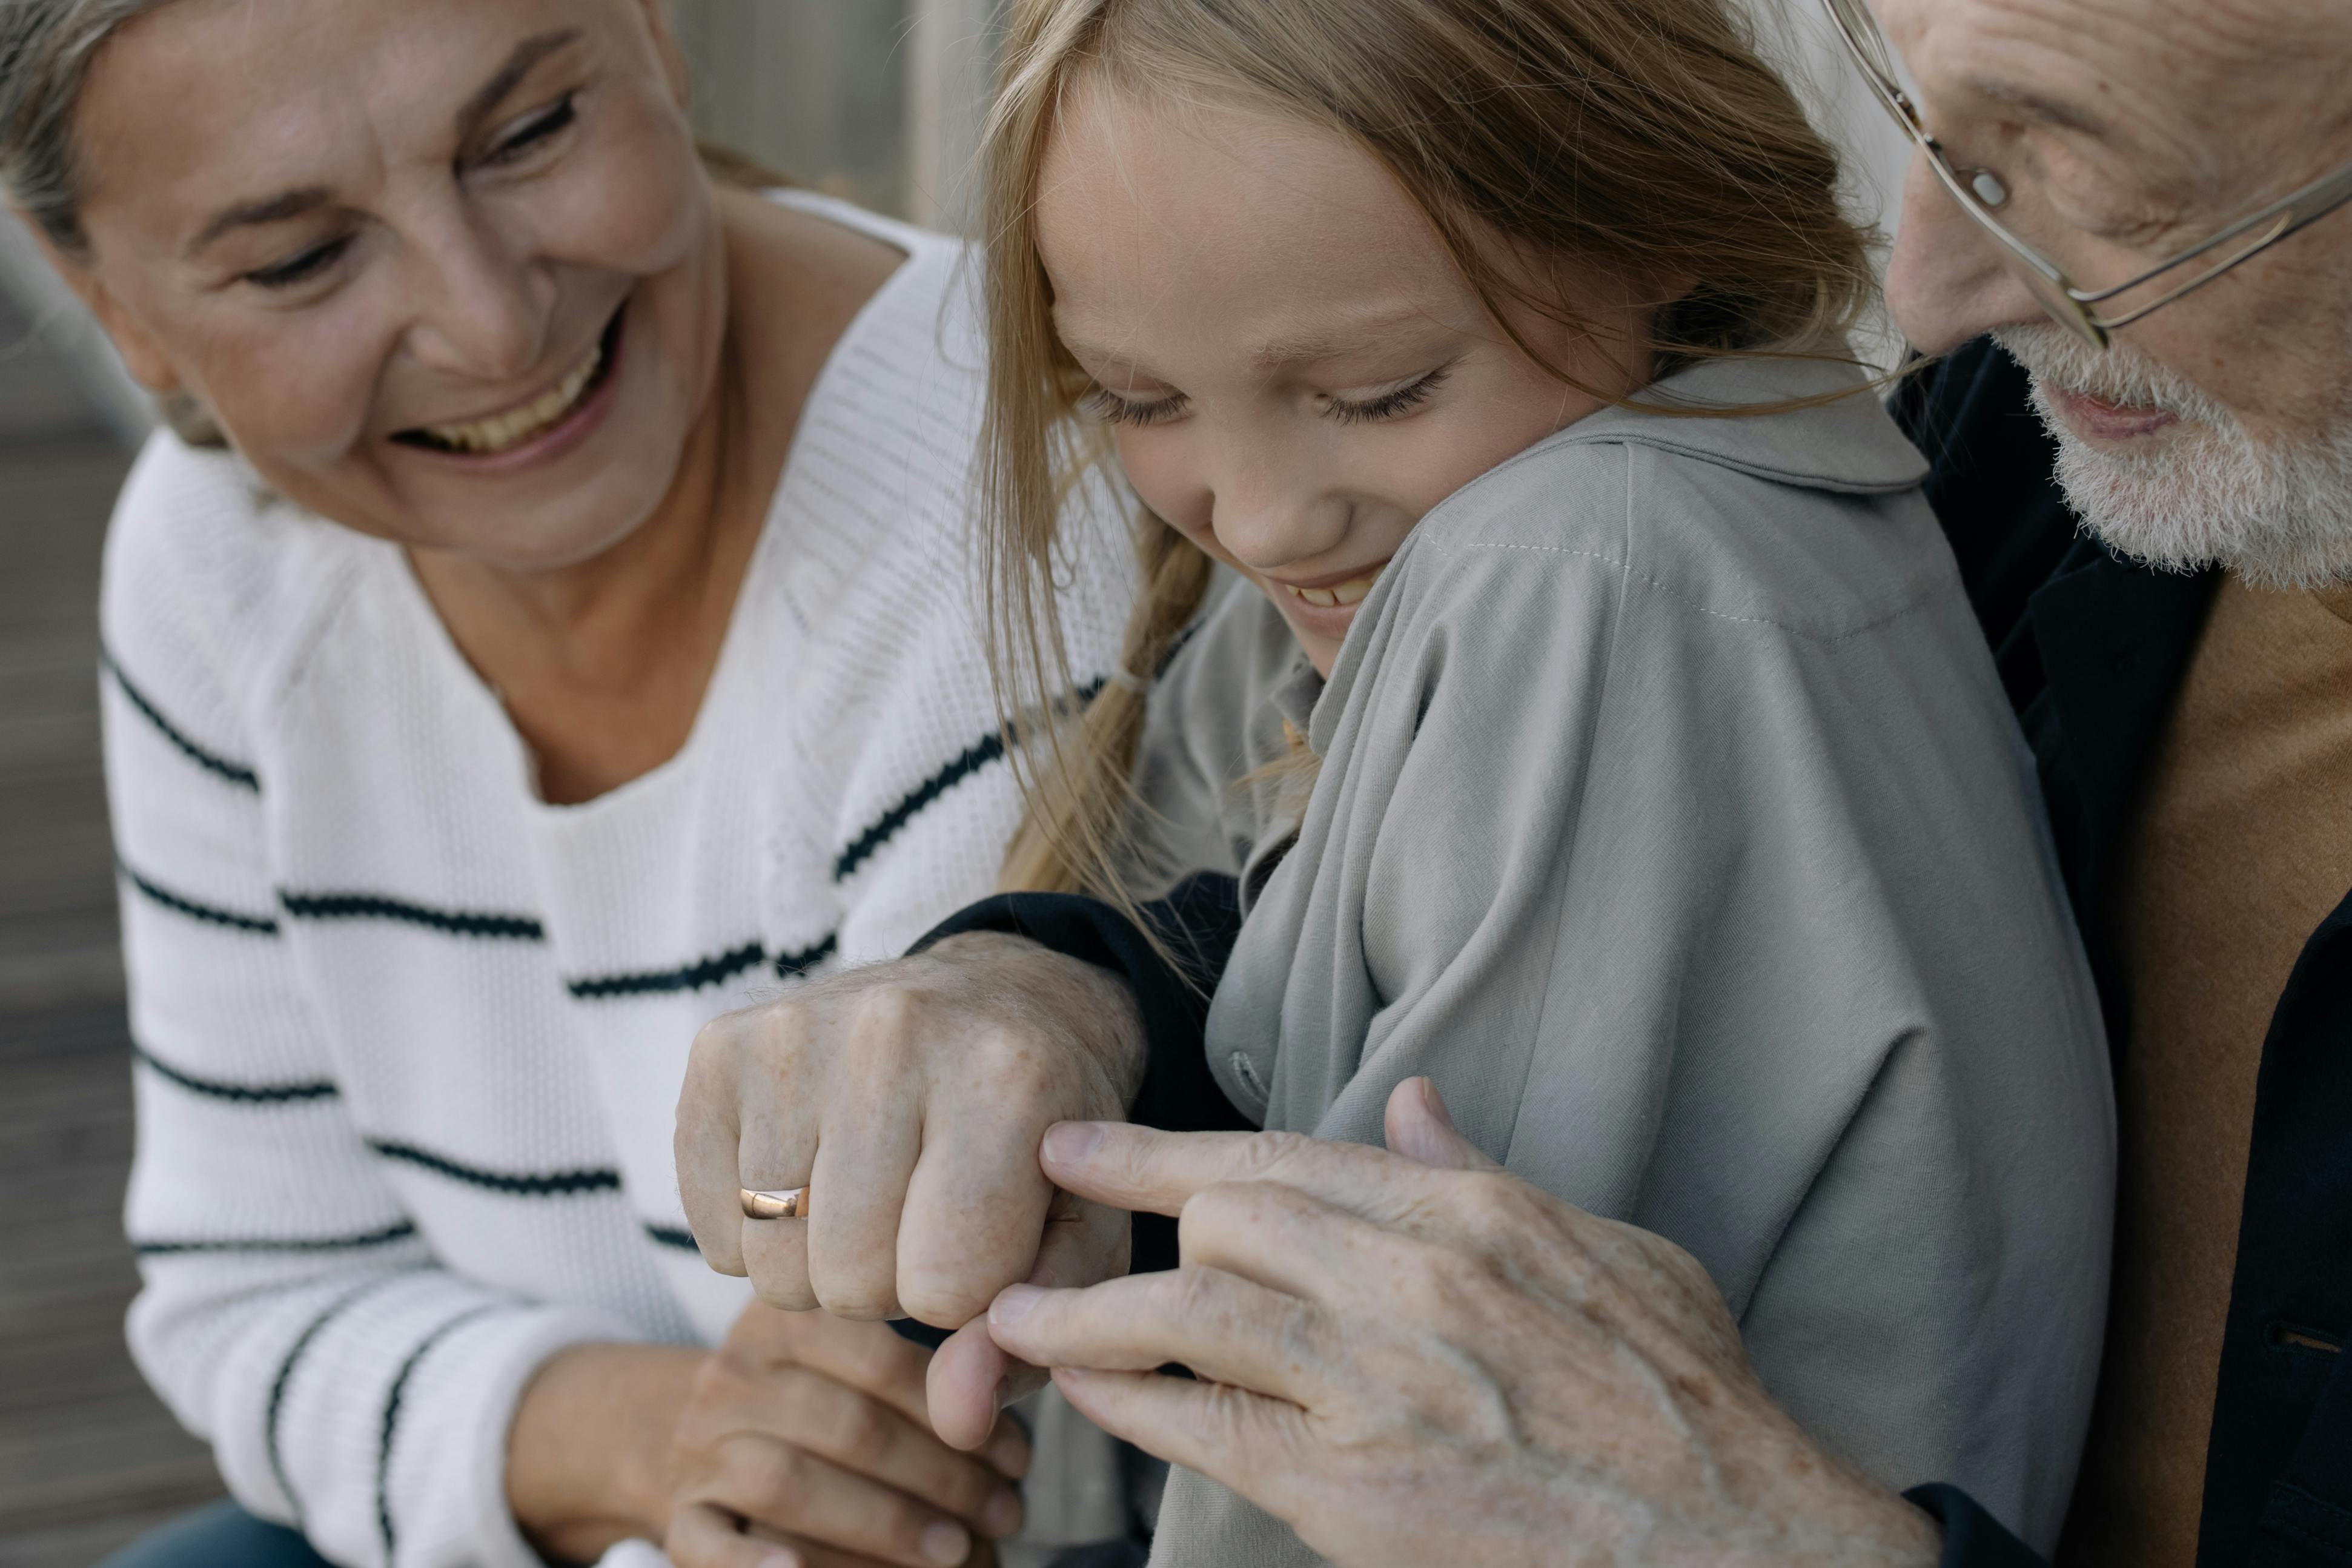 Granddaughter playing with her grandparents | Source: Pexels